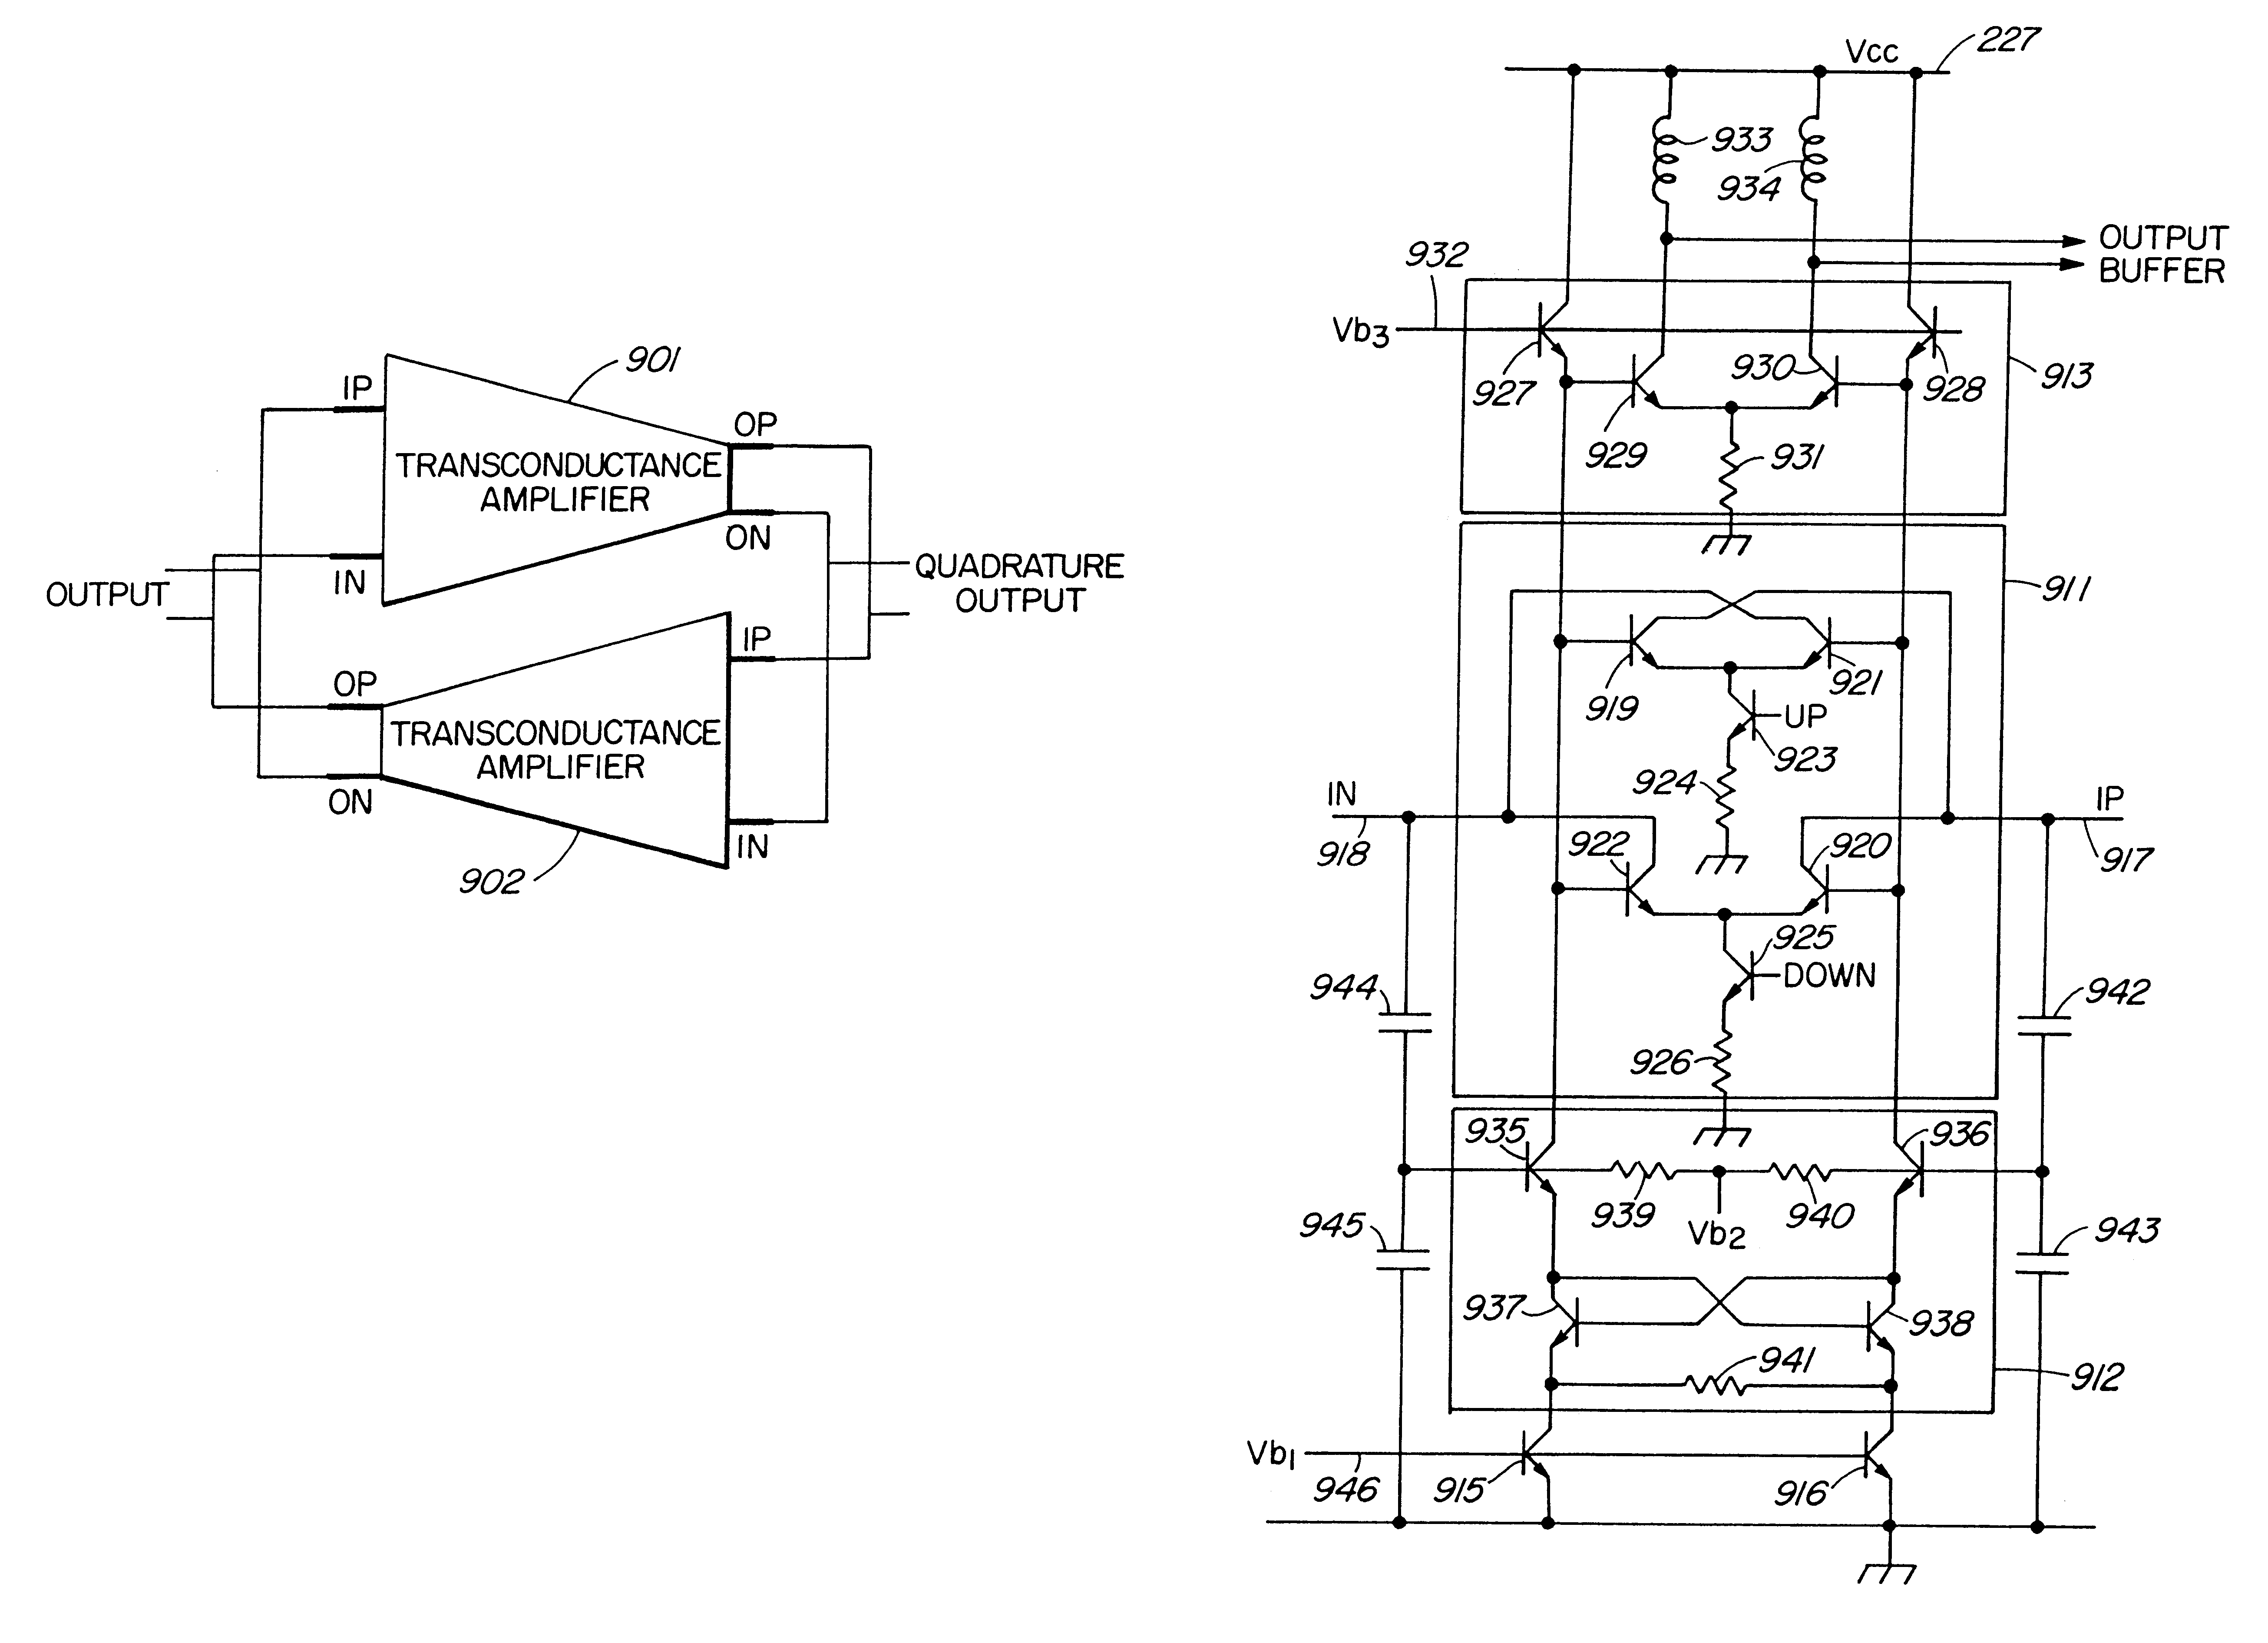 Gyrator with loop amplifiers connected to inductive elements